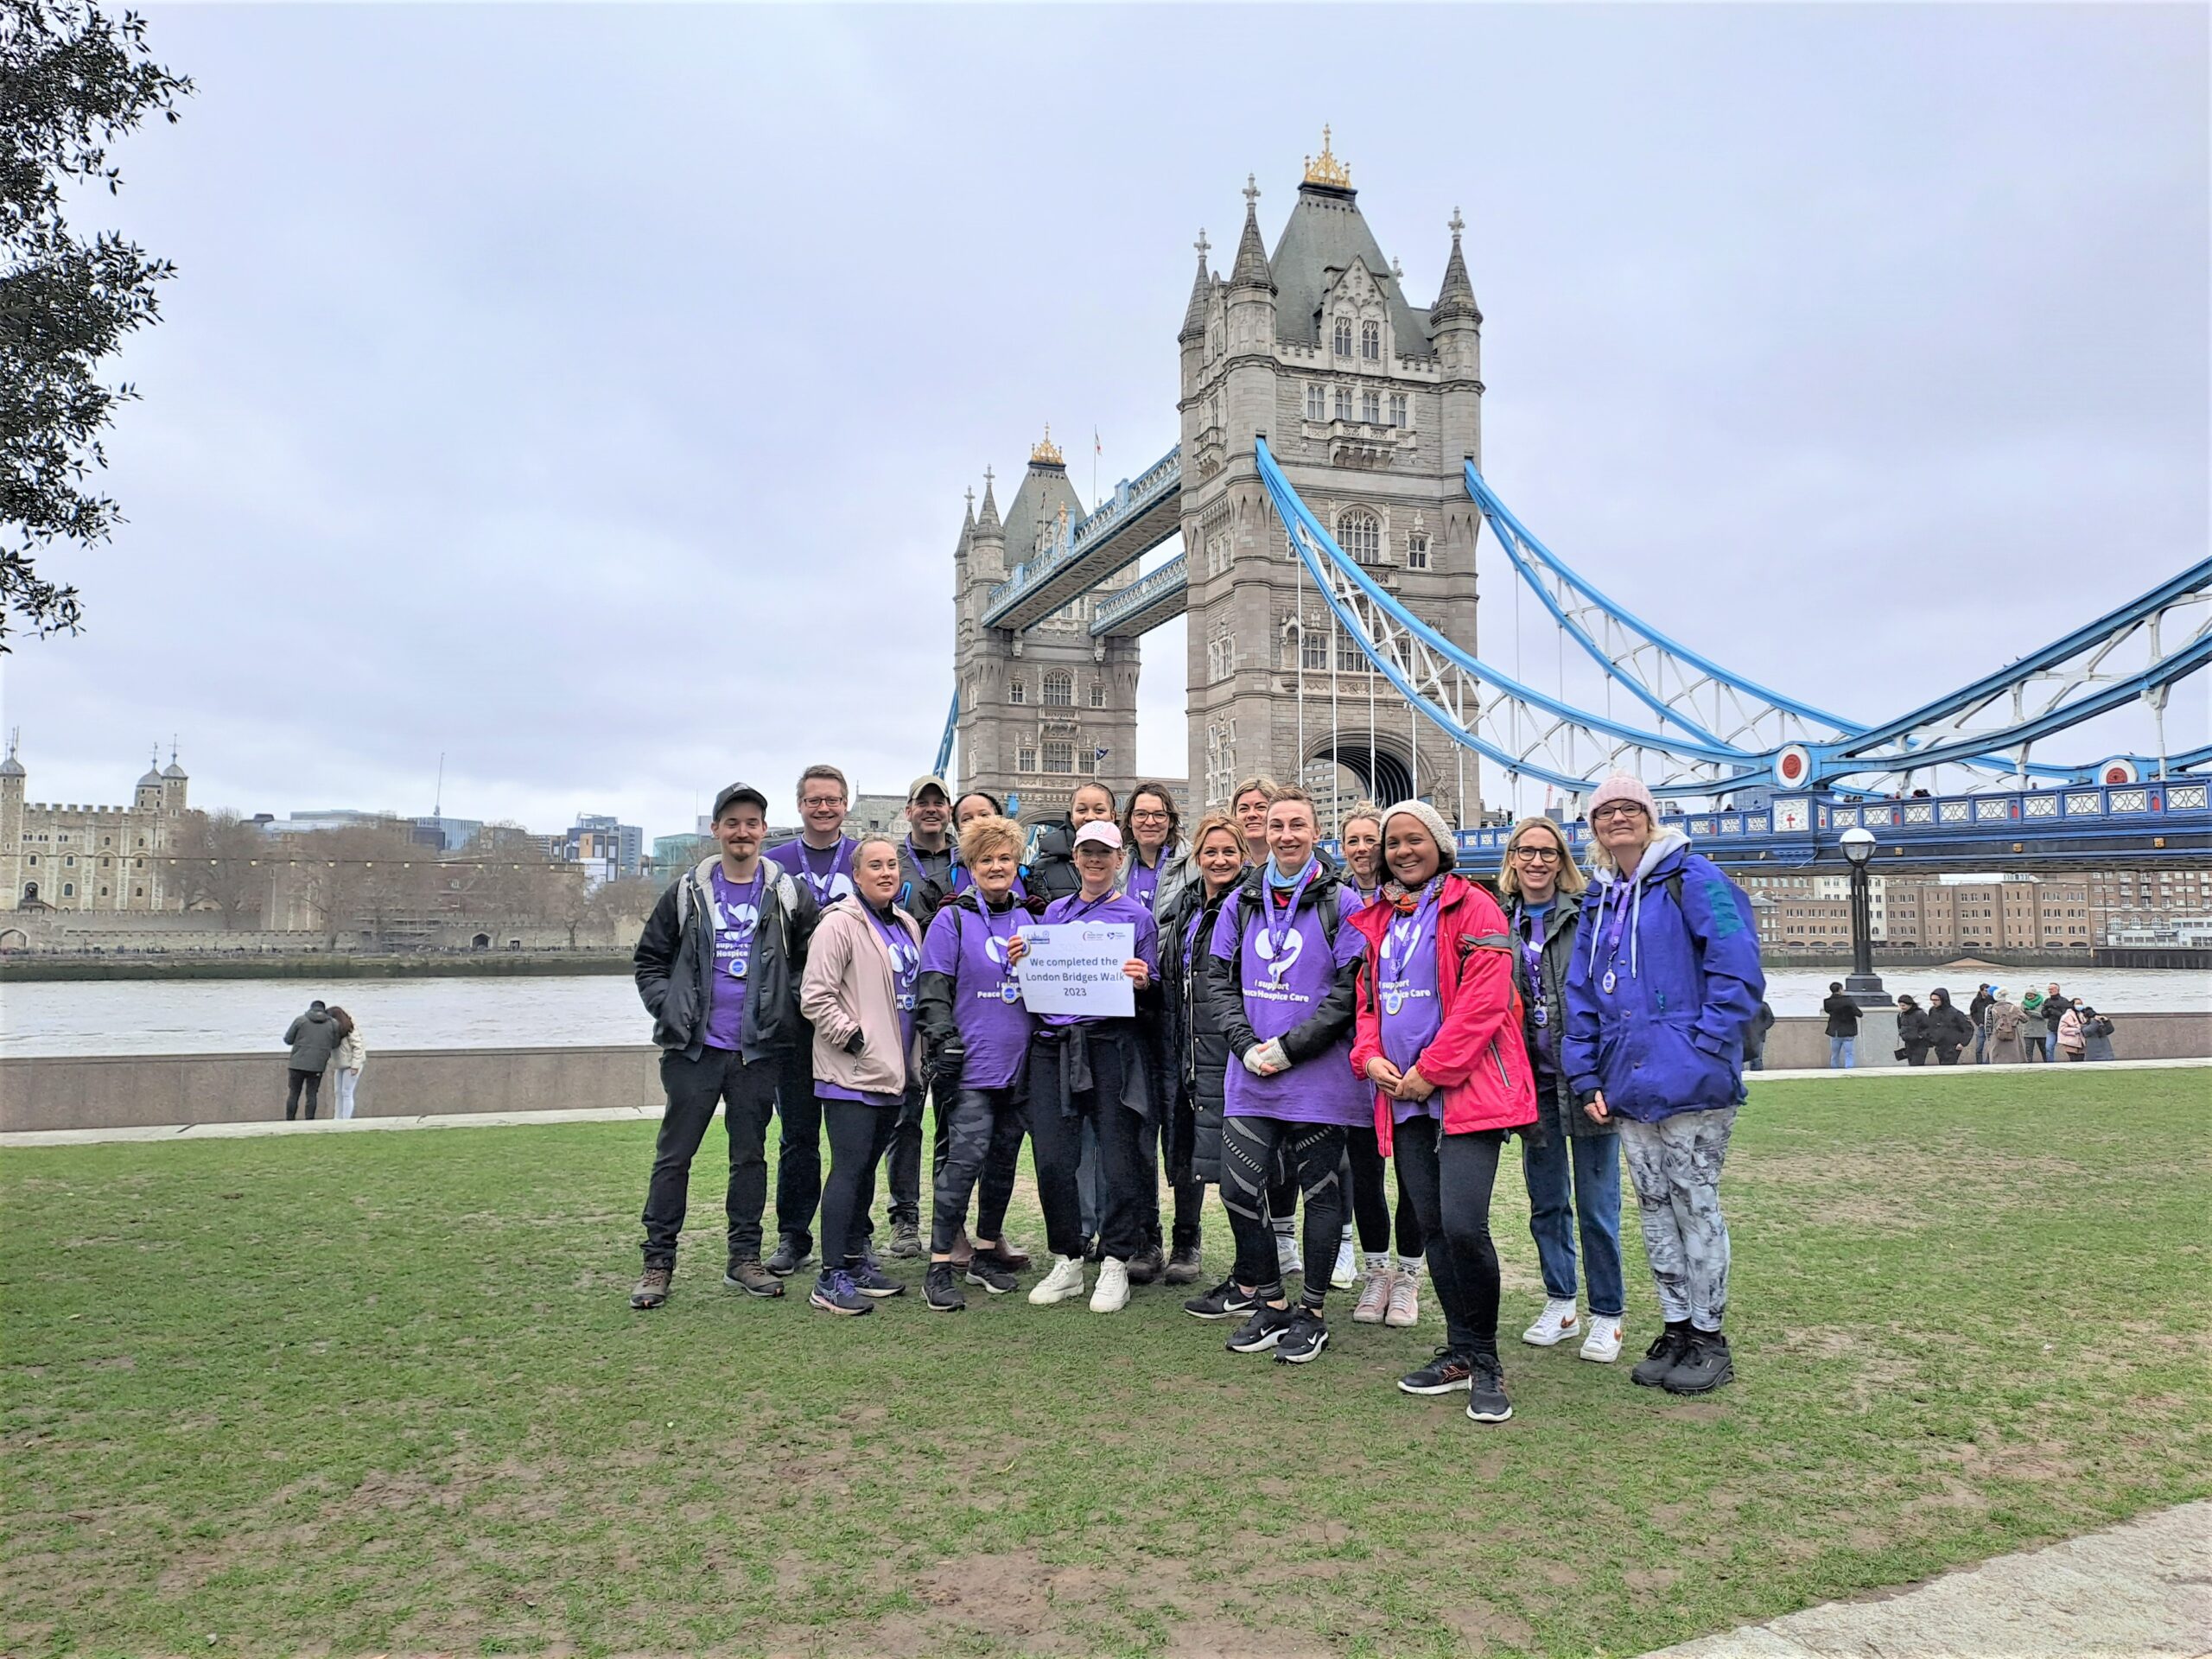 How to set up your JustGiving page for the London Bridges Walk